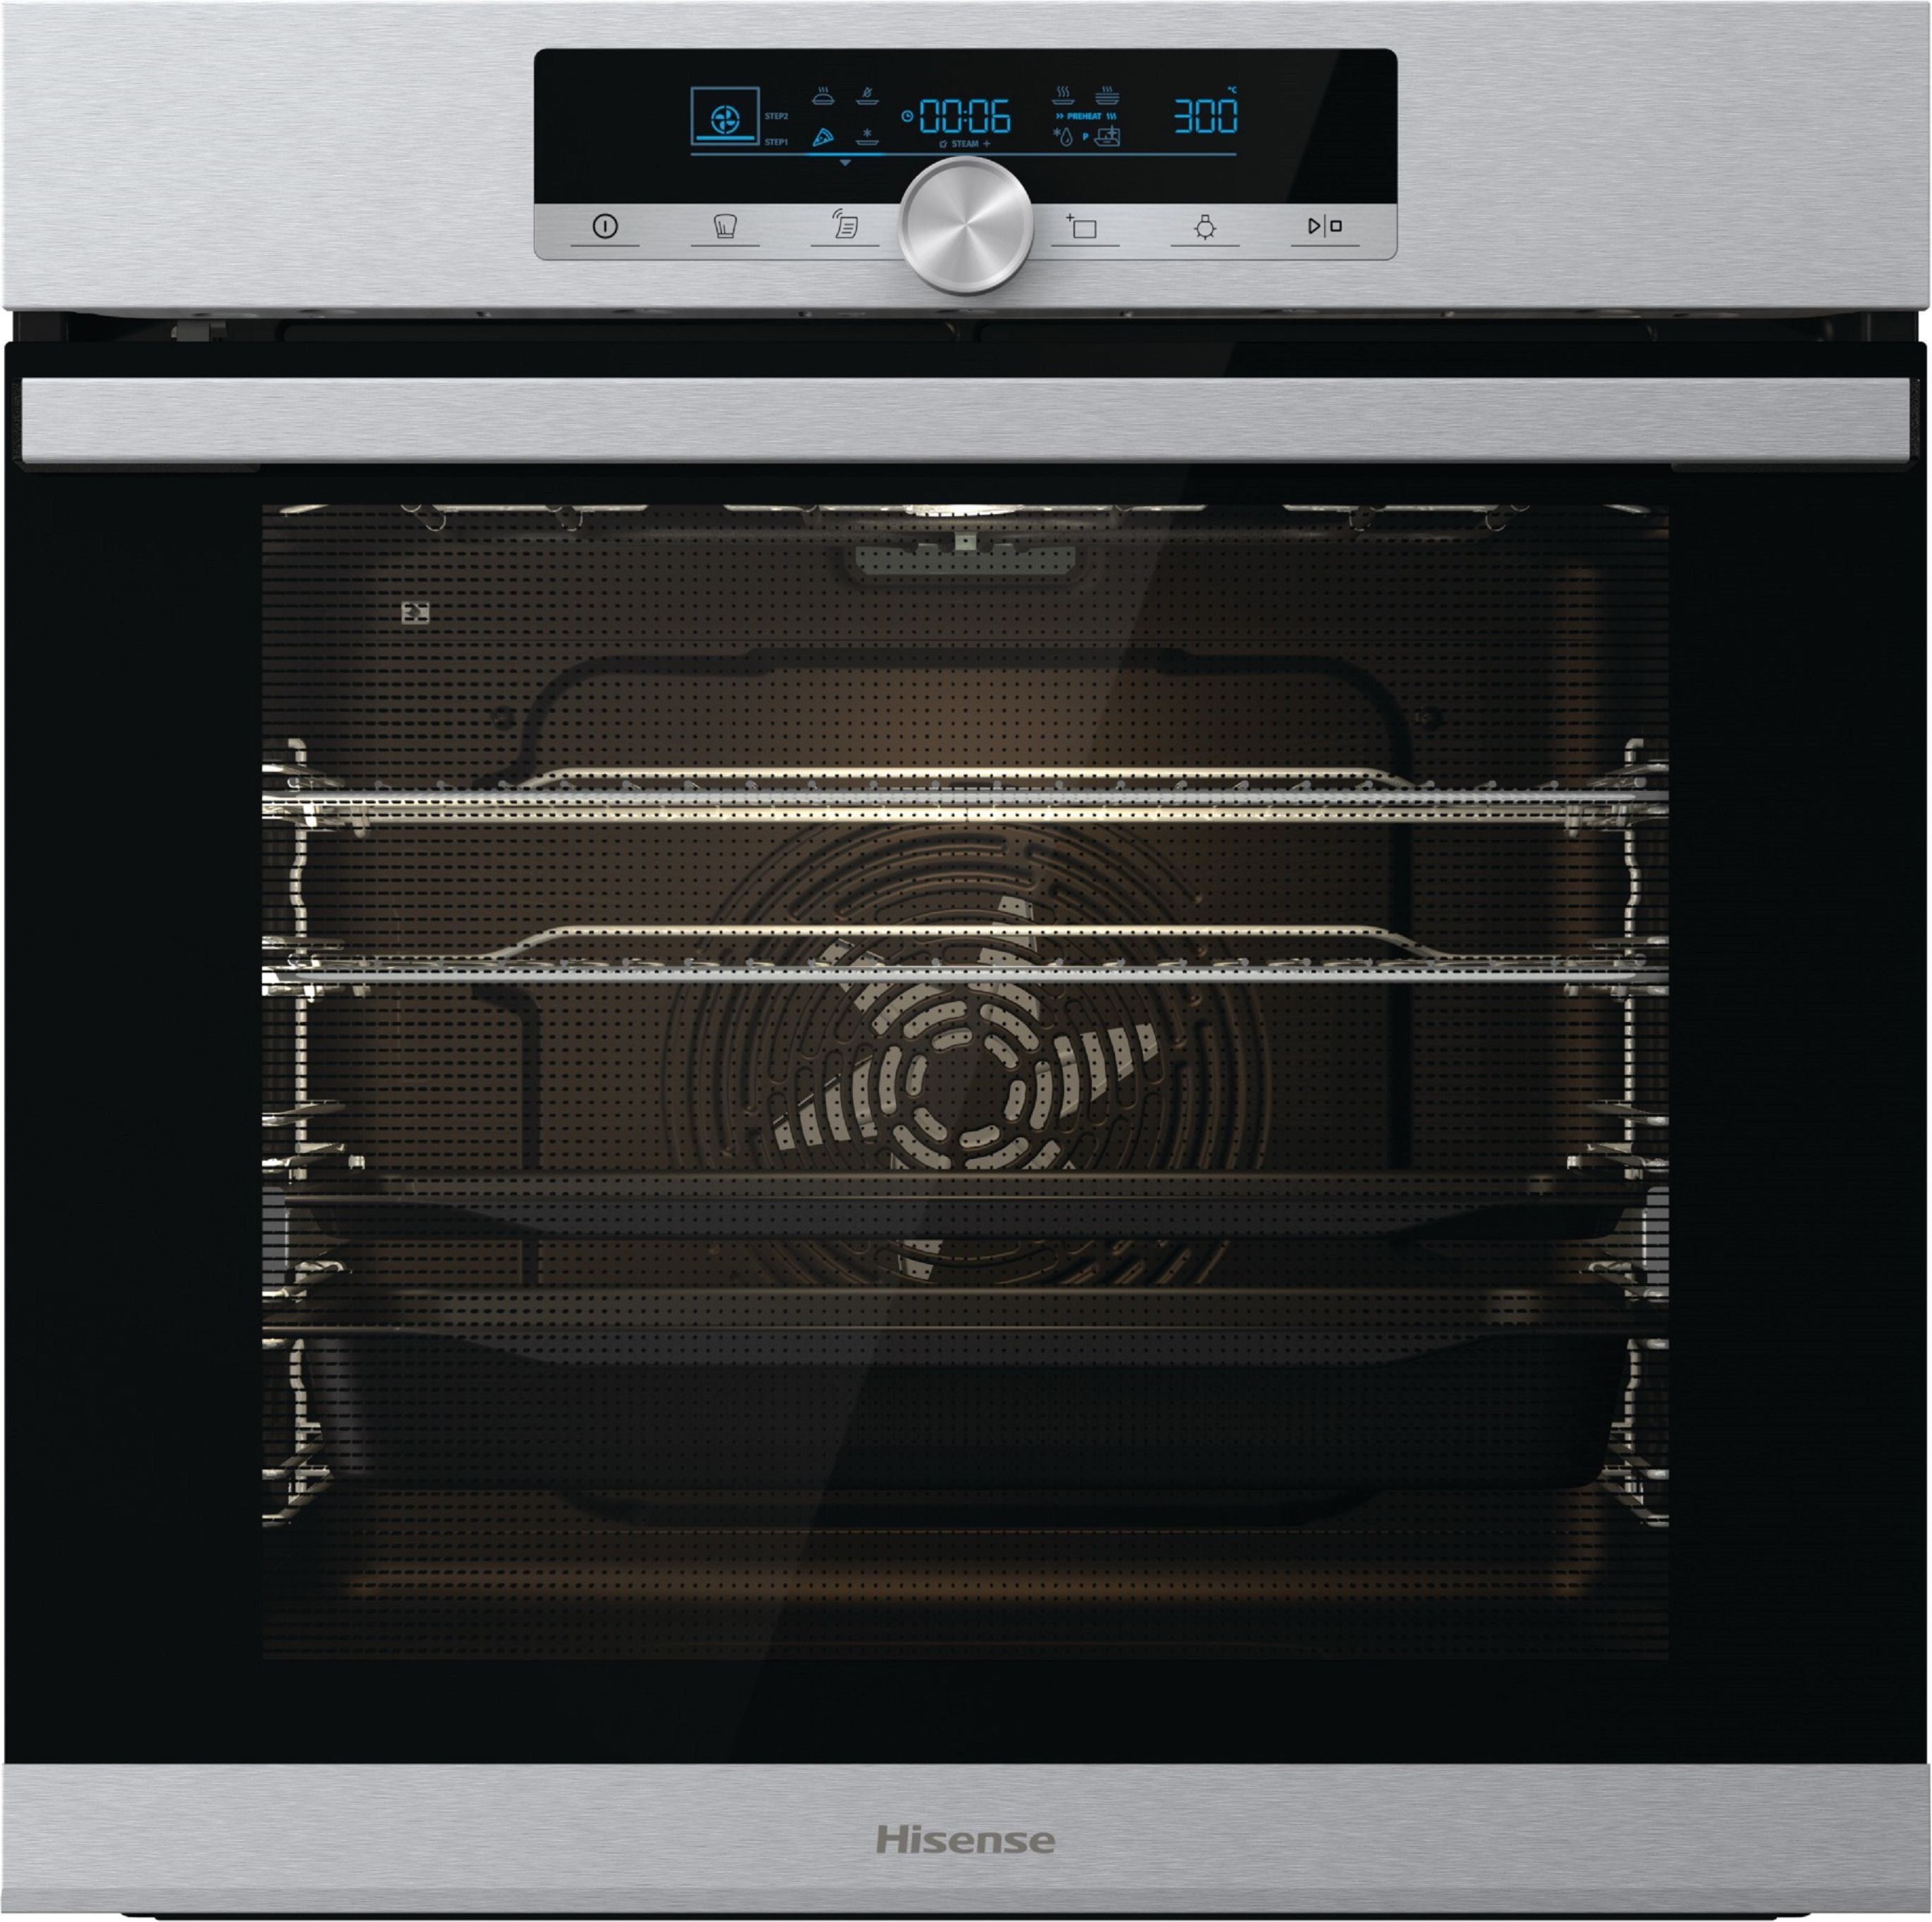 Hisense BSA65336PX Built In Electric Single Oven and Pyrolytic Cleaning - Stainless Steel - A+ Rated, Stainless Steel